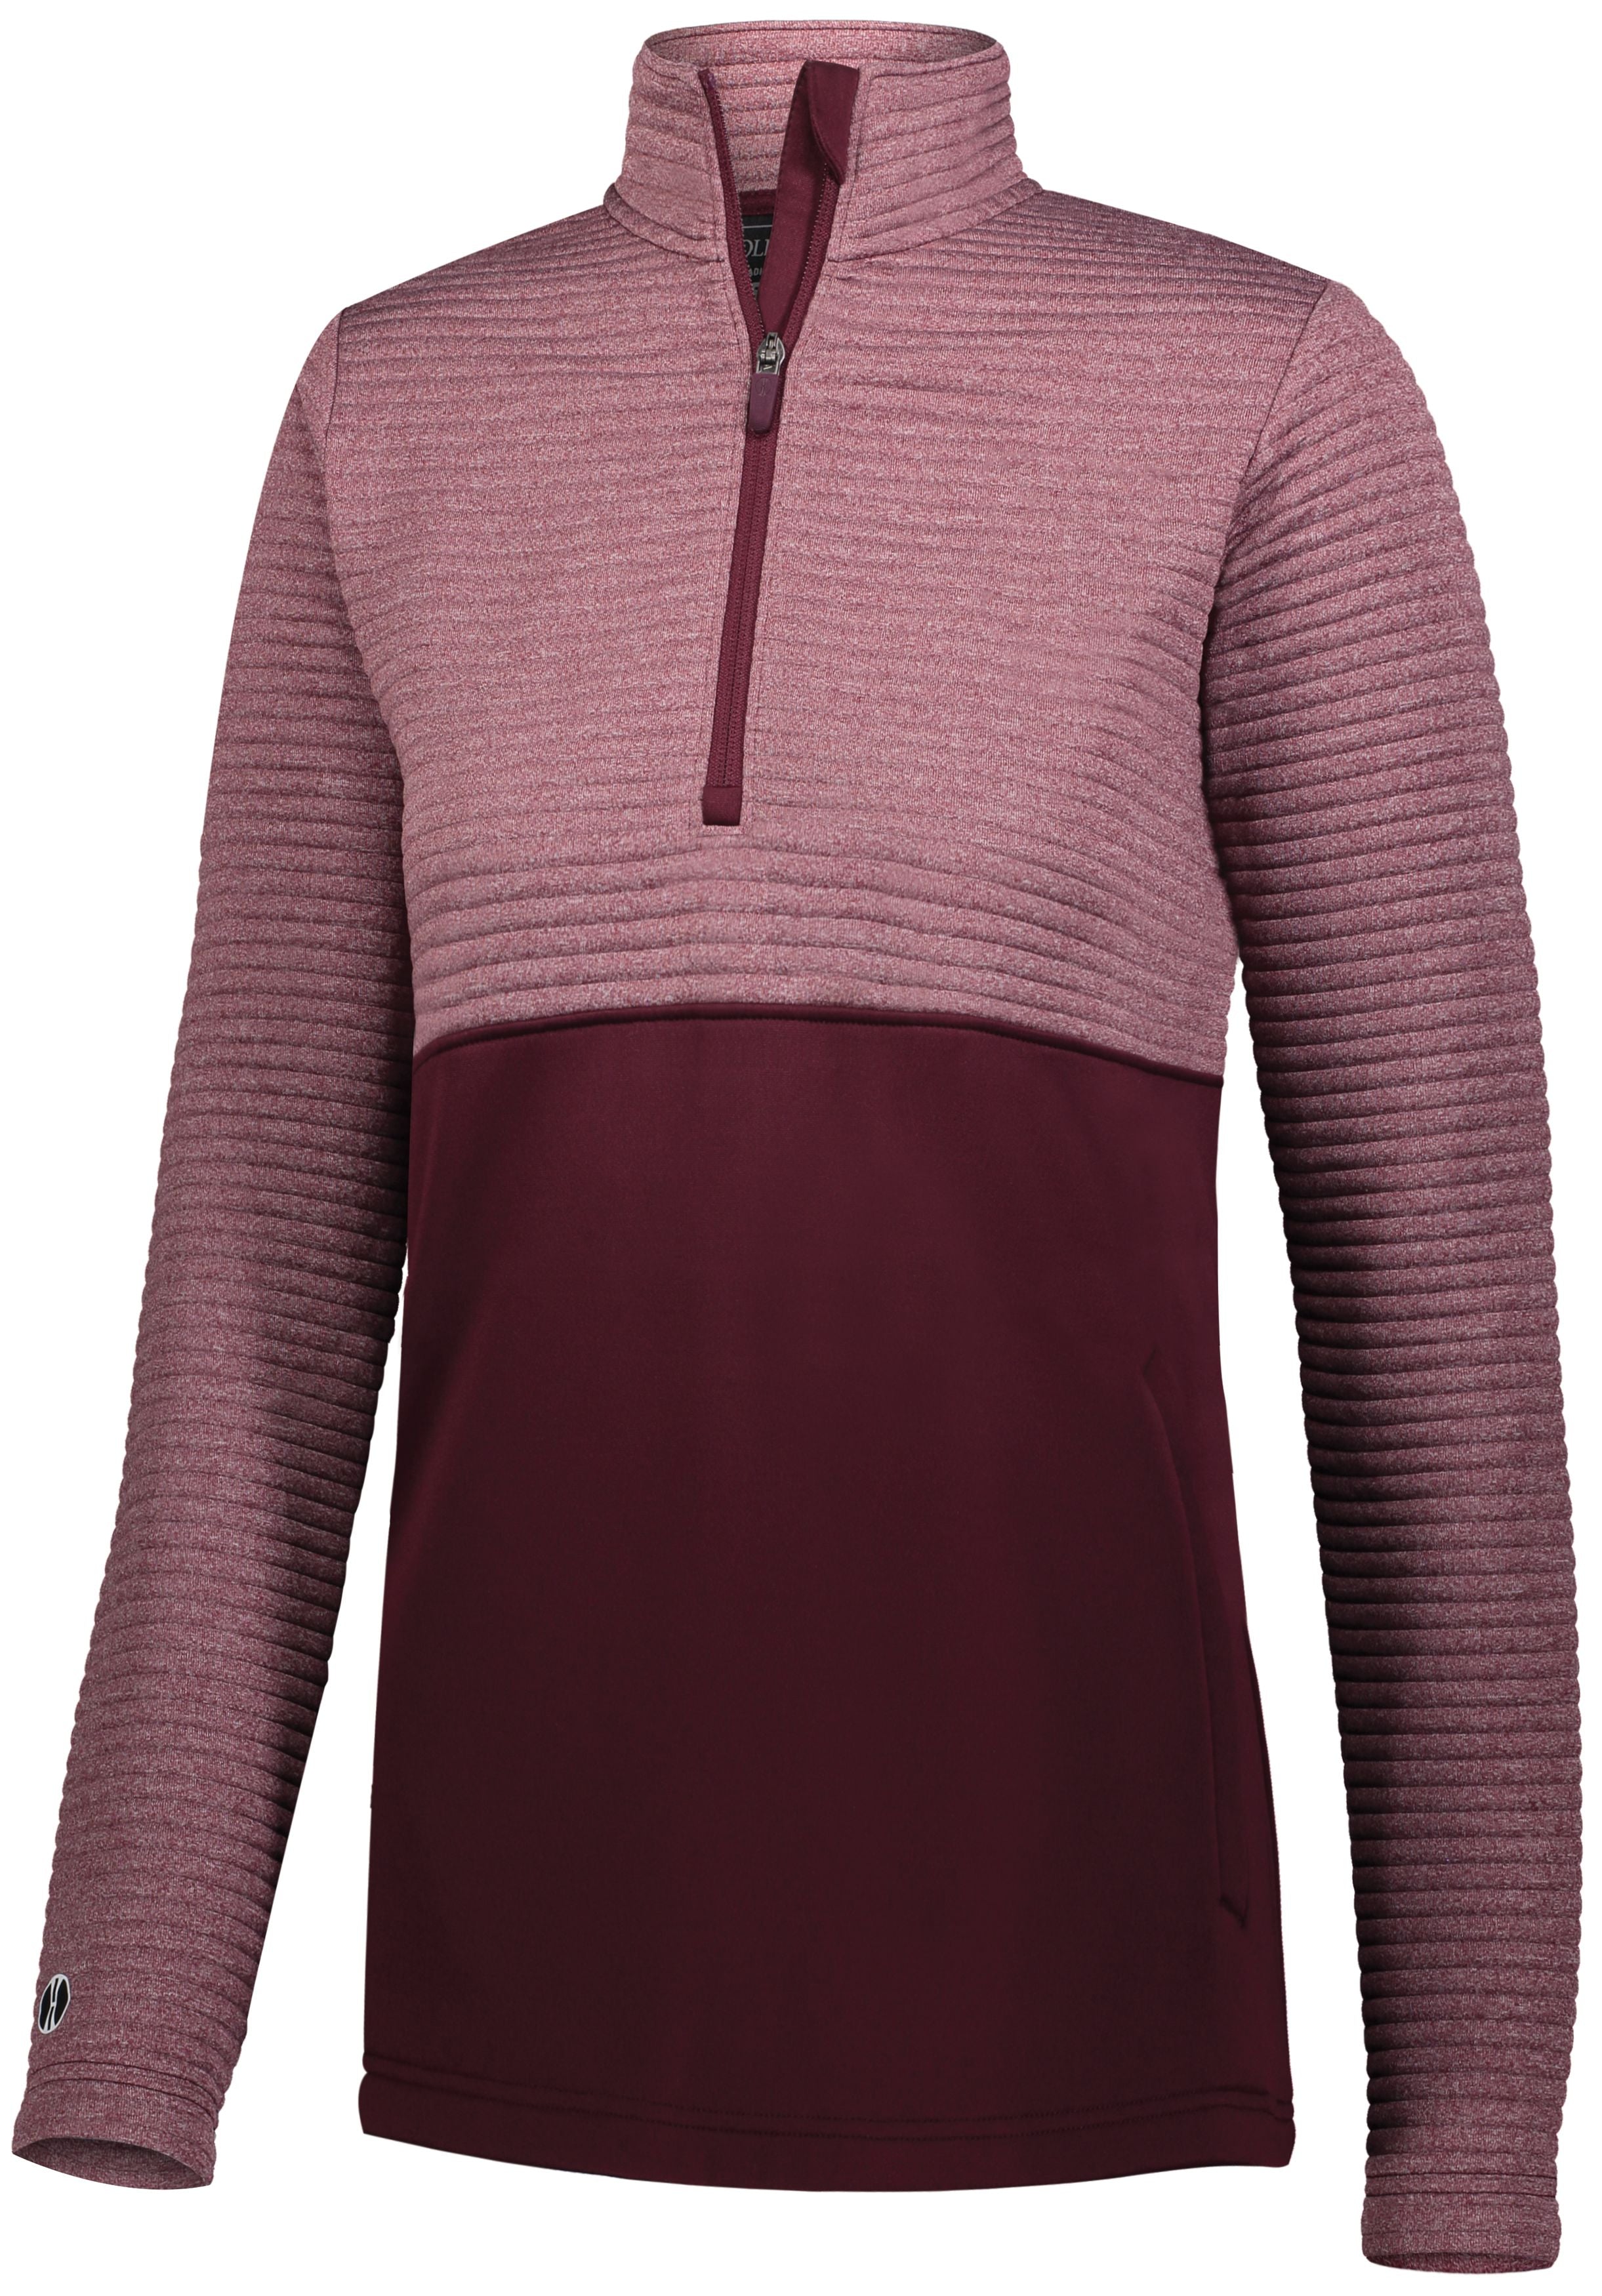 Holloway Ladies 3D Regulate Pullover in Maroon Heather/Maroon  -Part of the Ladies, Ladies-Pullover, Holloway, Outerwear, 3D-Collection product lines at KanaleyCreations.com